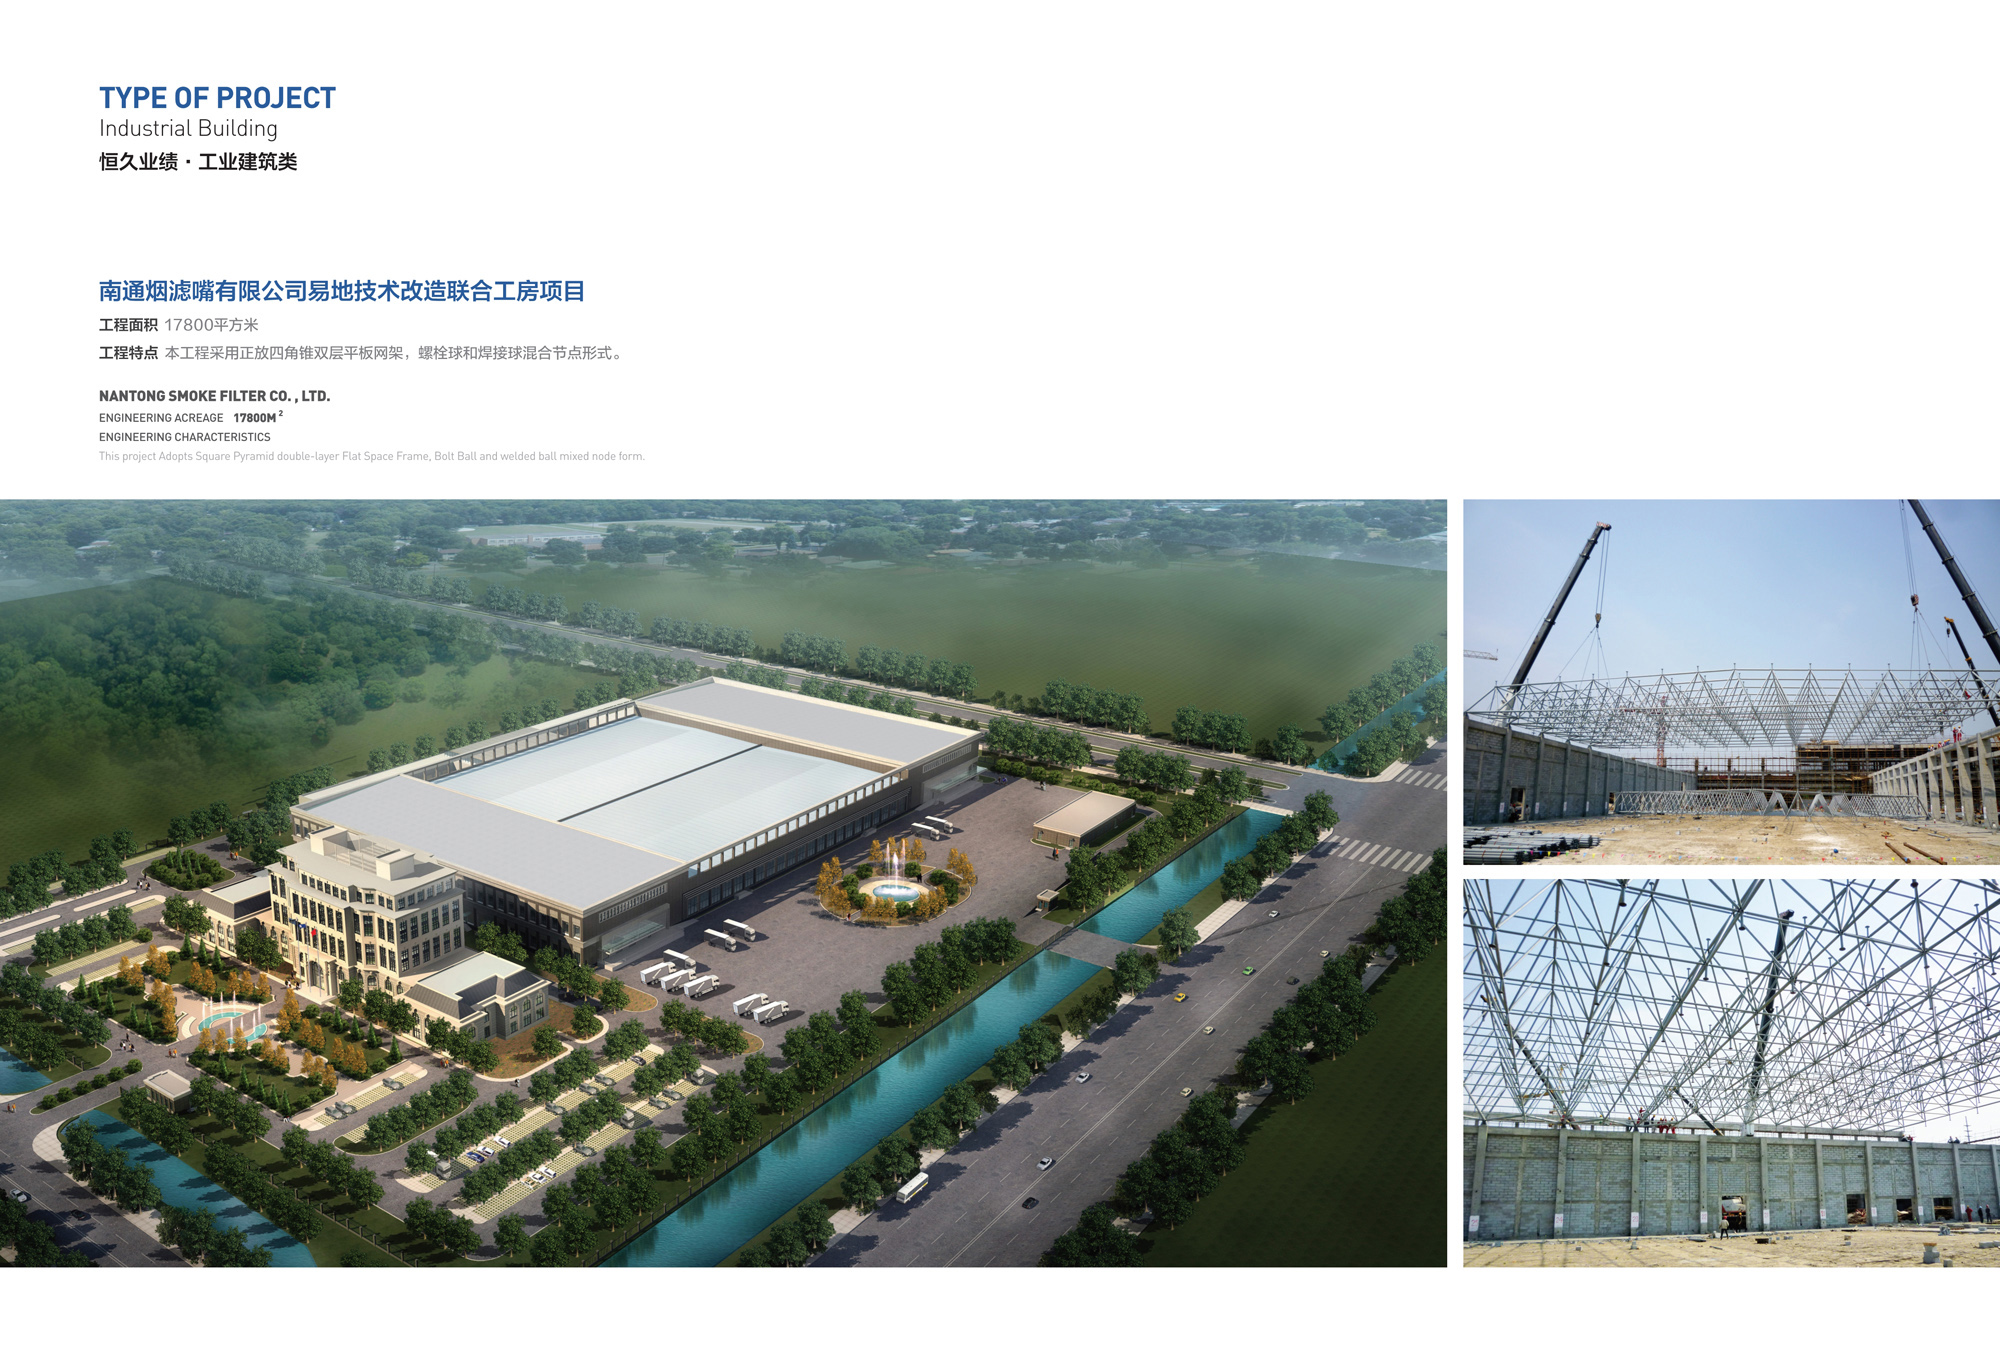 Nantong Tobacco Filter Co., Ltd. Yidi Technology Transformation Joint Workshop Project